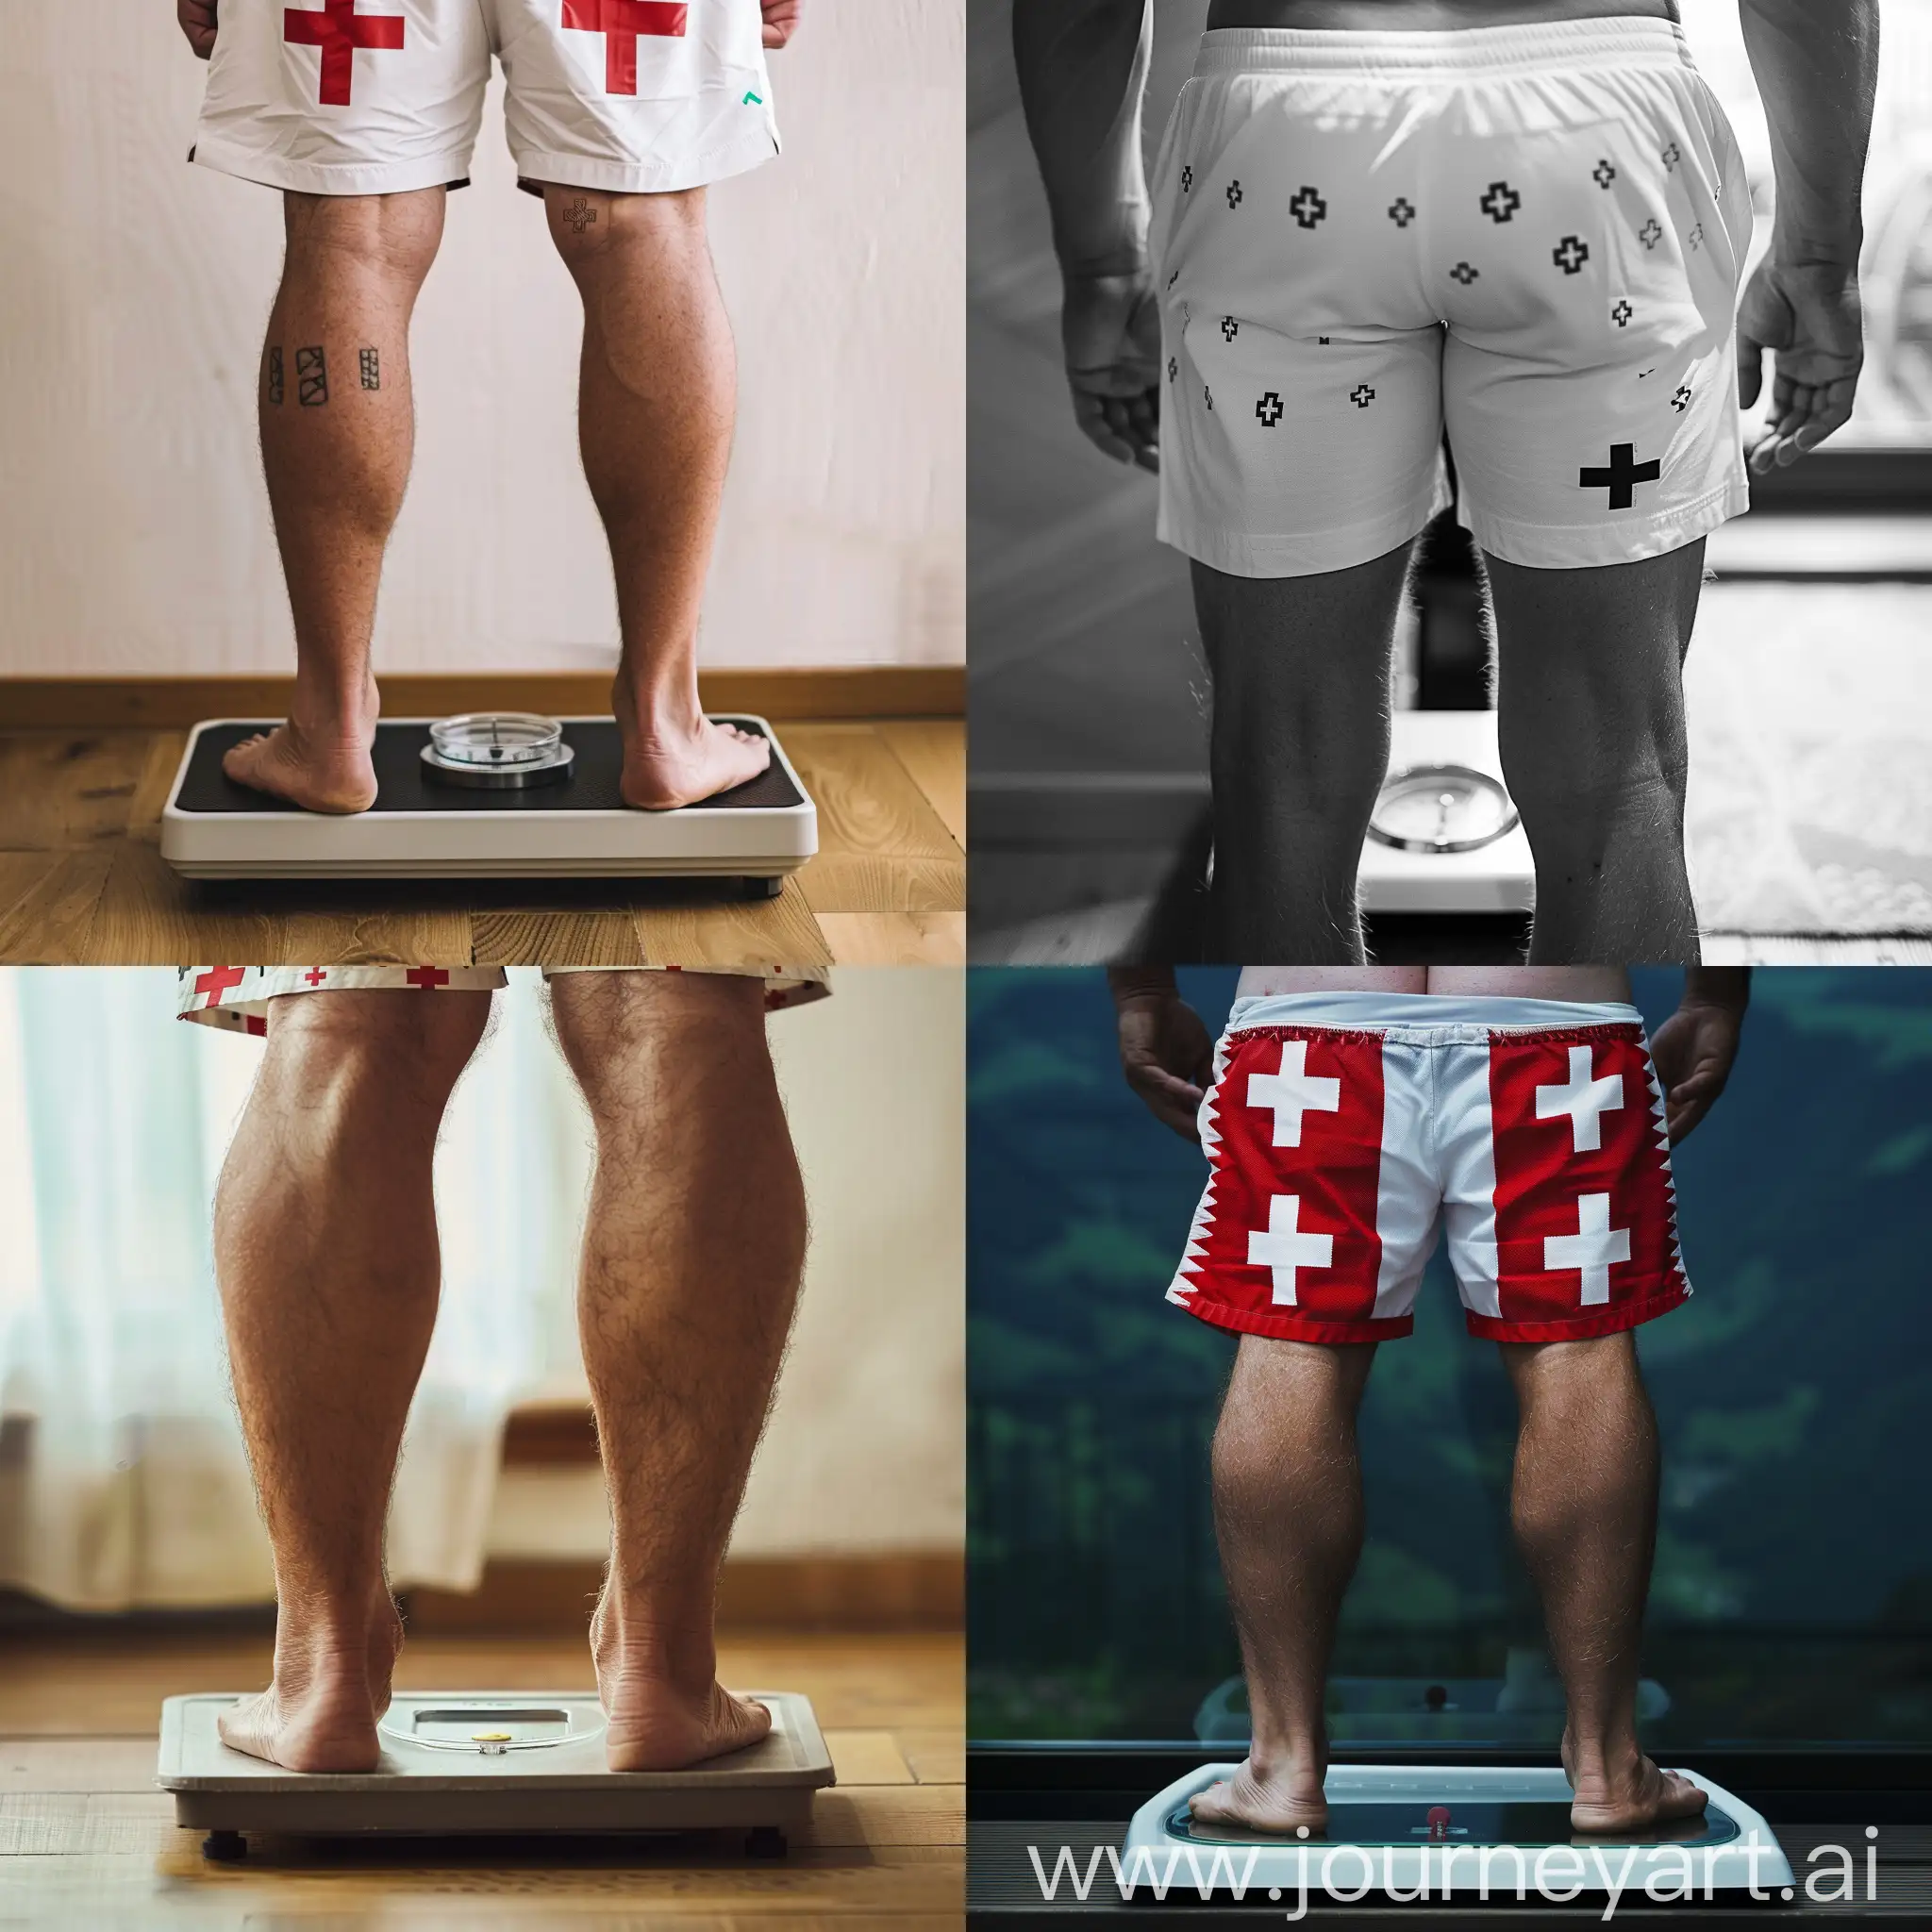 Man-Checking-Weight-on-Scale-in-Shorts-with-Swiss-Cross-Design